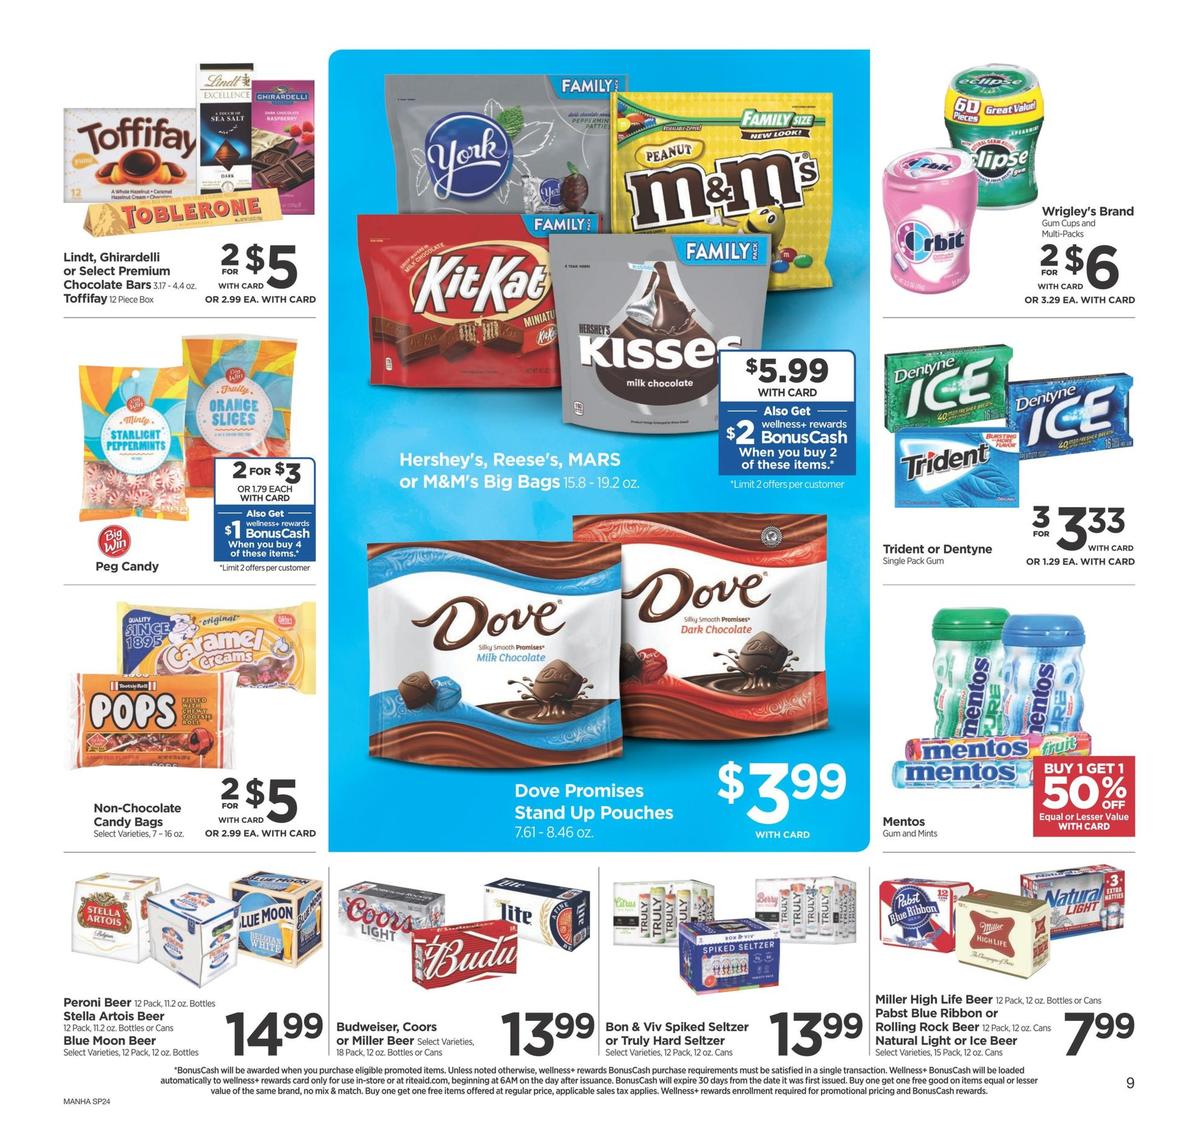 Rite Aid Weekly Ad from July 28